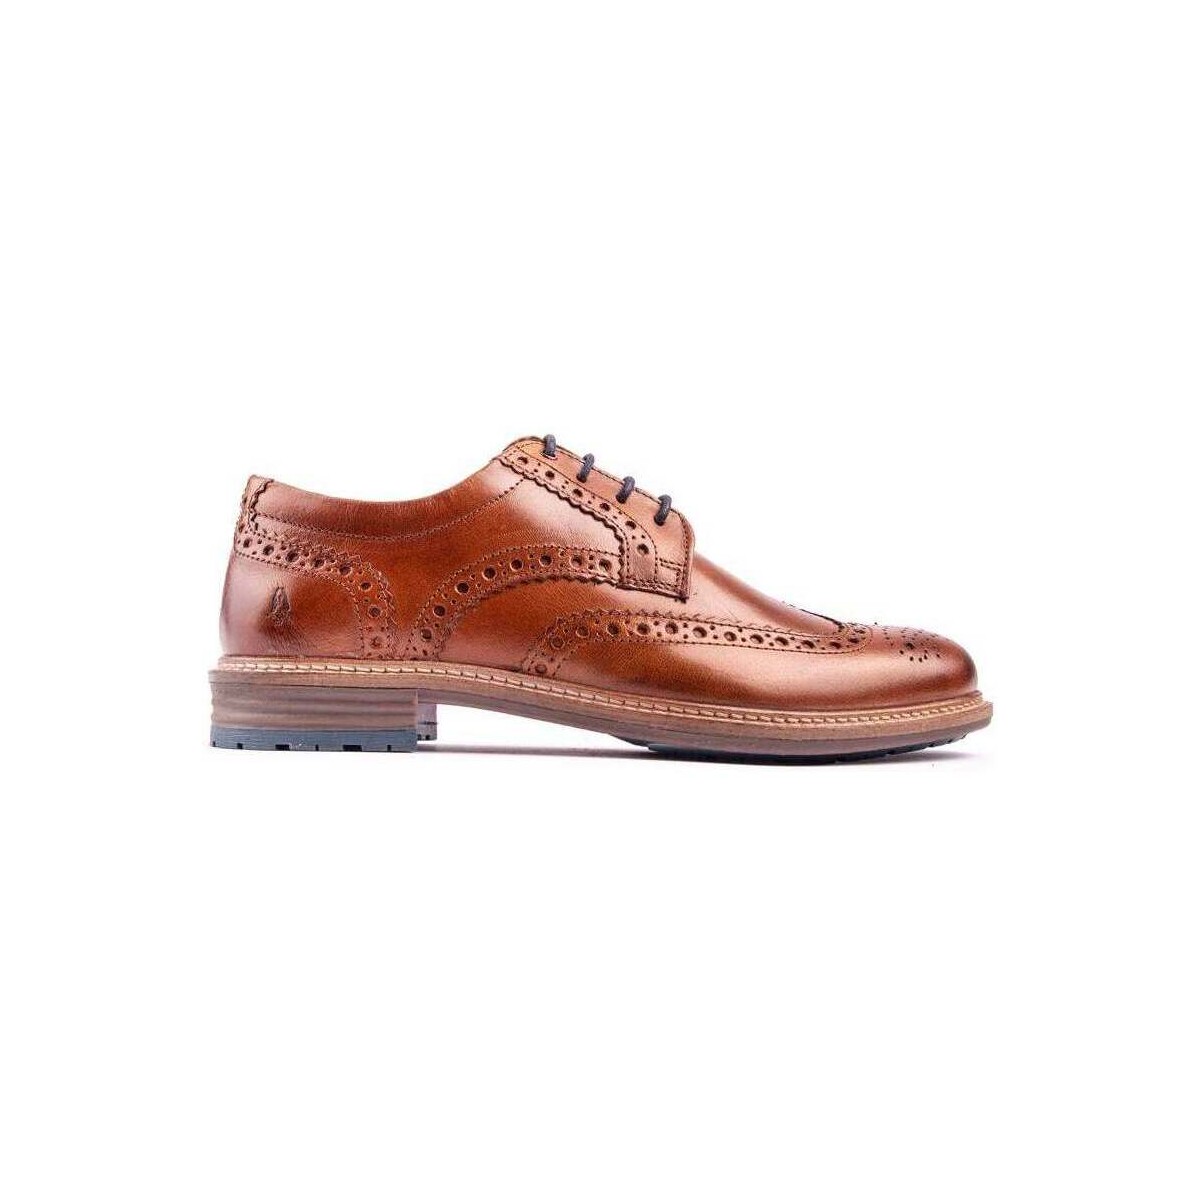 Chaussures Homme Duck And Cover Largo Chaussures À Lacets Marron